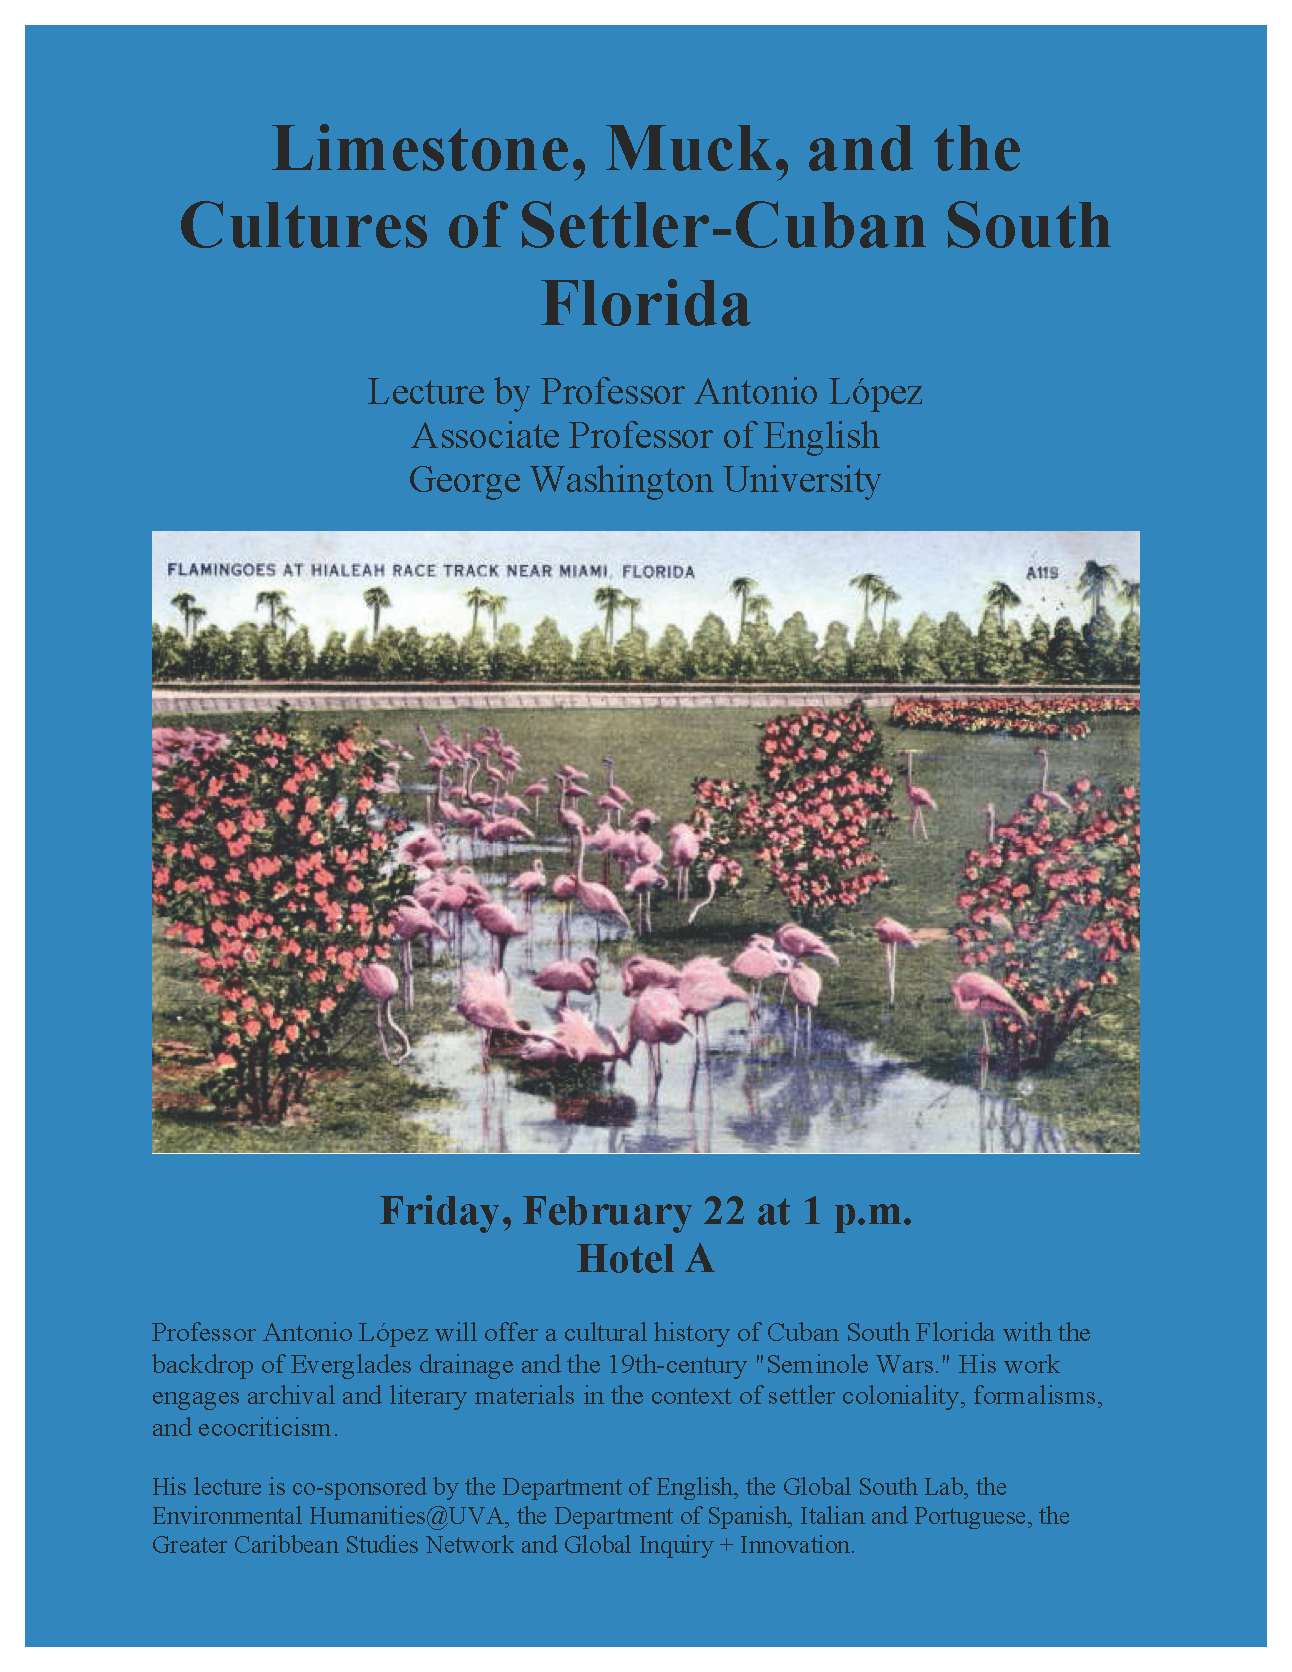 Limestone, Muck, and the Cultures of Settler-Cuban South Florida